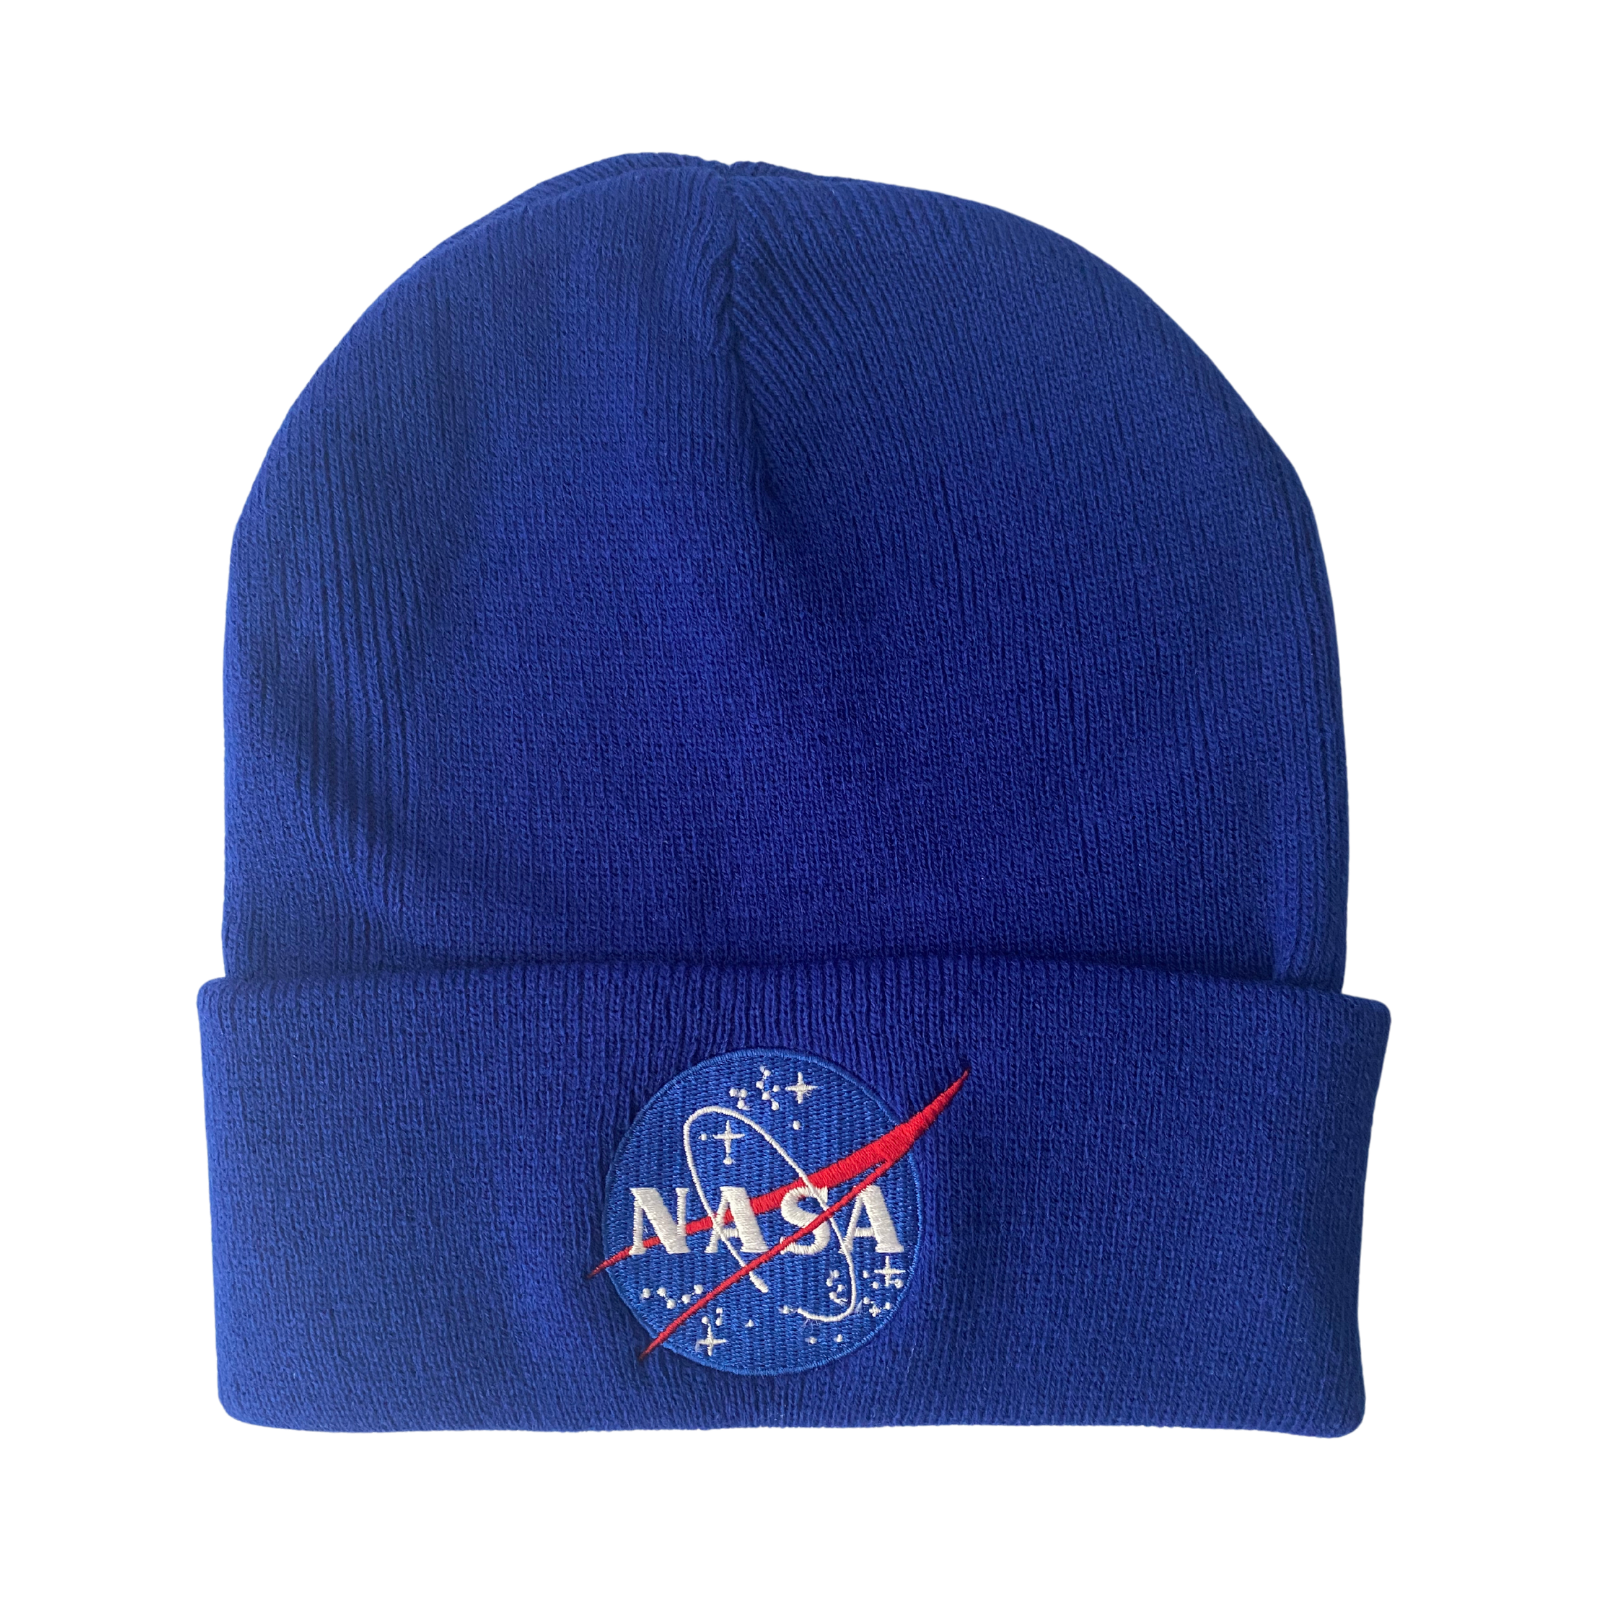 NASA Logo Embroidered Beanie with Cuff - Assorted Colors